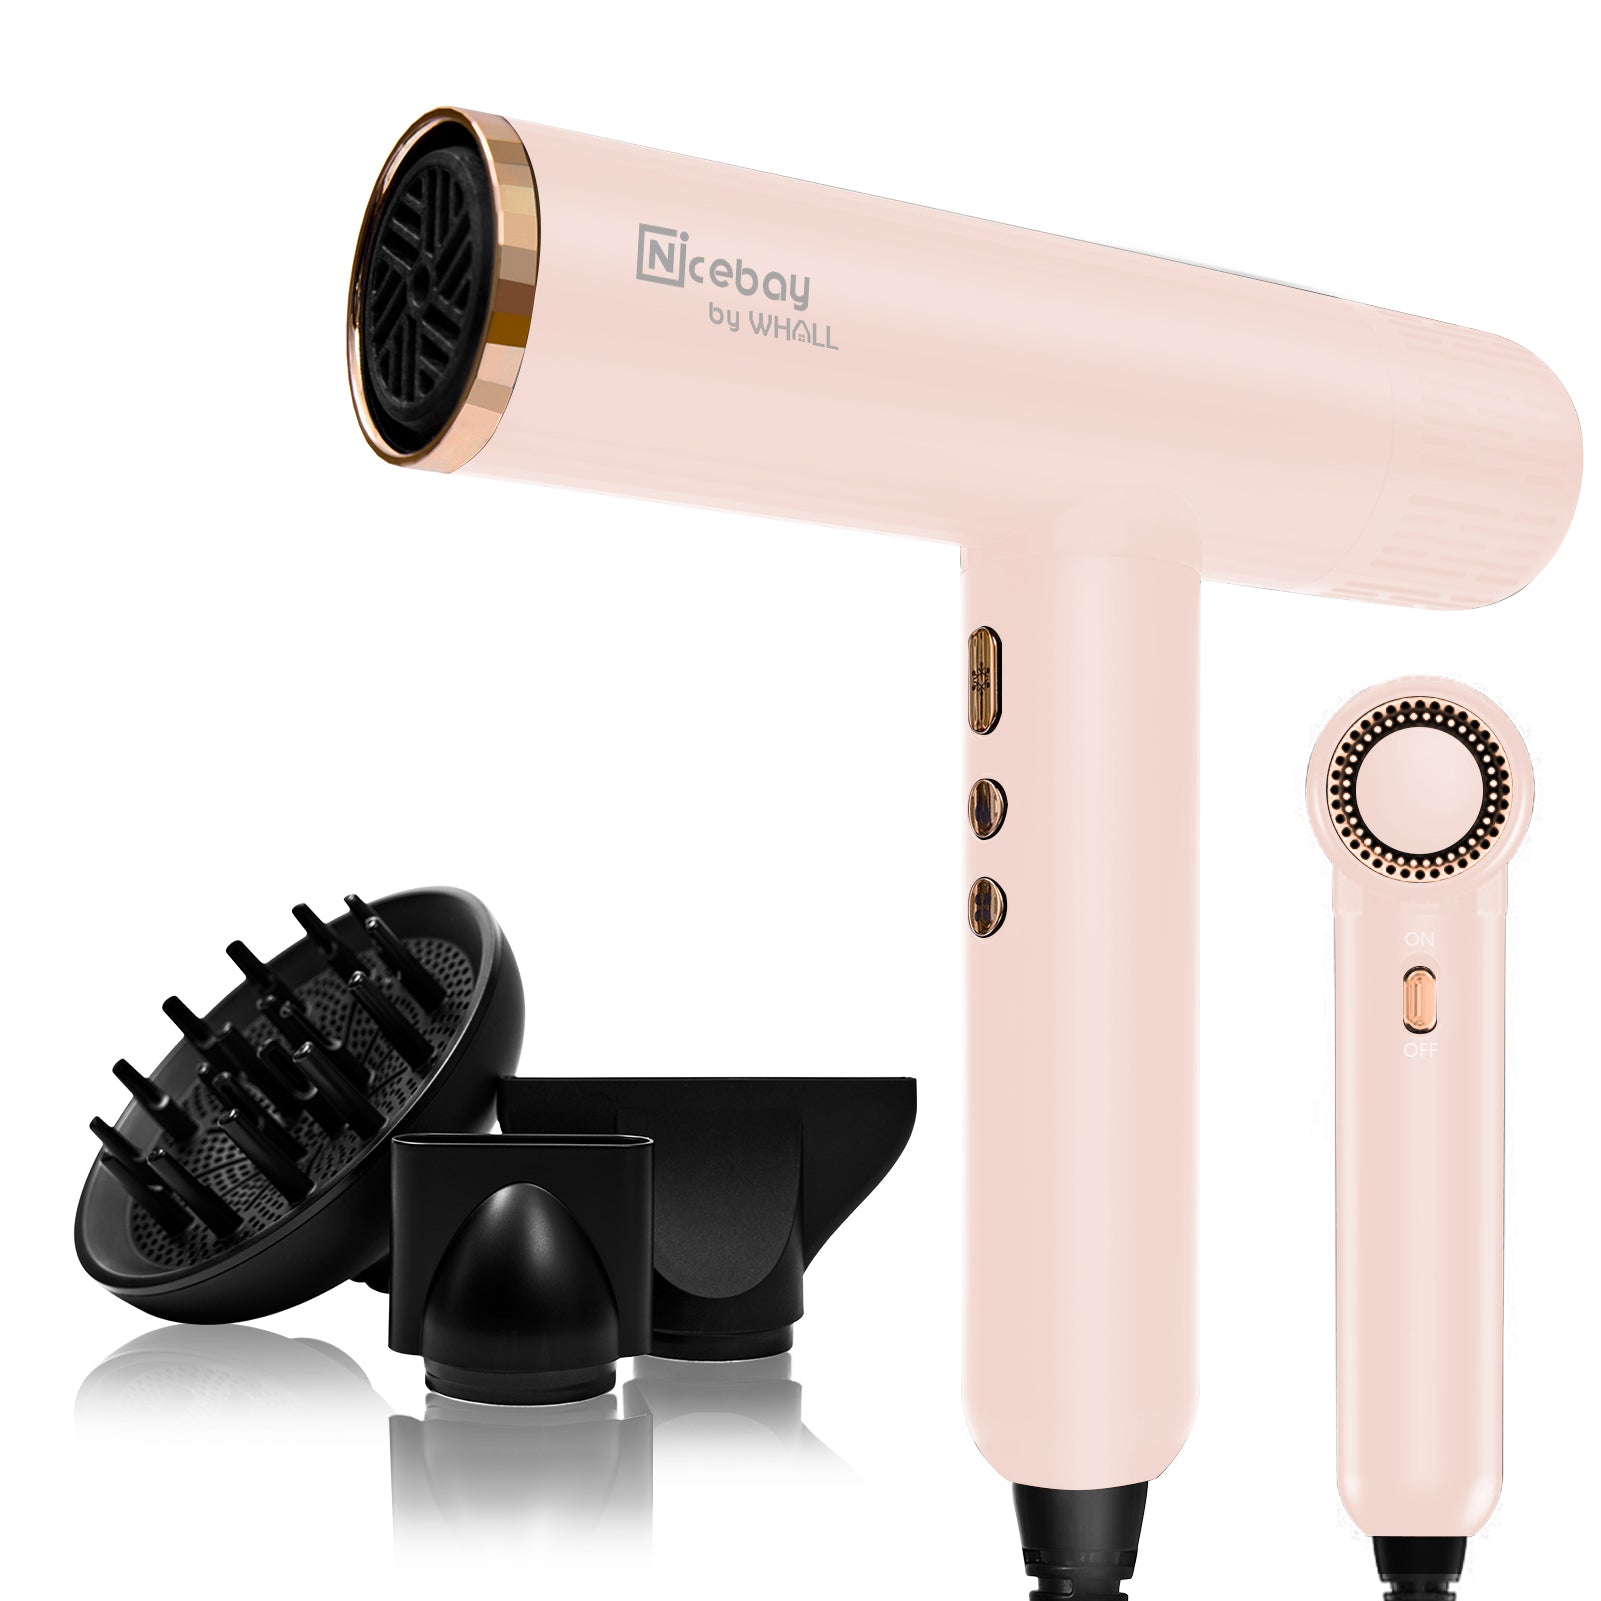 NICEBAY® Hair Dryer-Pink, Professional Blow Dryer with 3 Attachments, 110000RPM High-Speed Brushless Motor for Fast Drying, Lightweight, Low Noise, 1600W Hairdryer with Diffuser-Pink